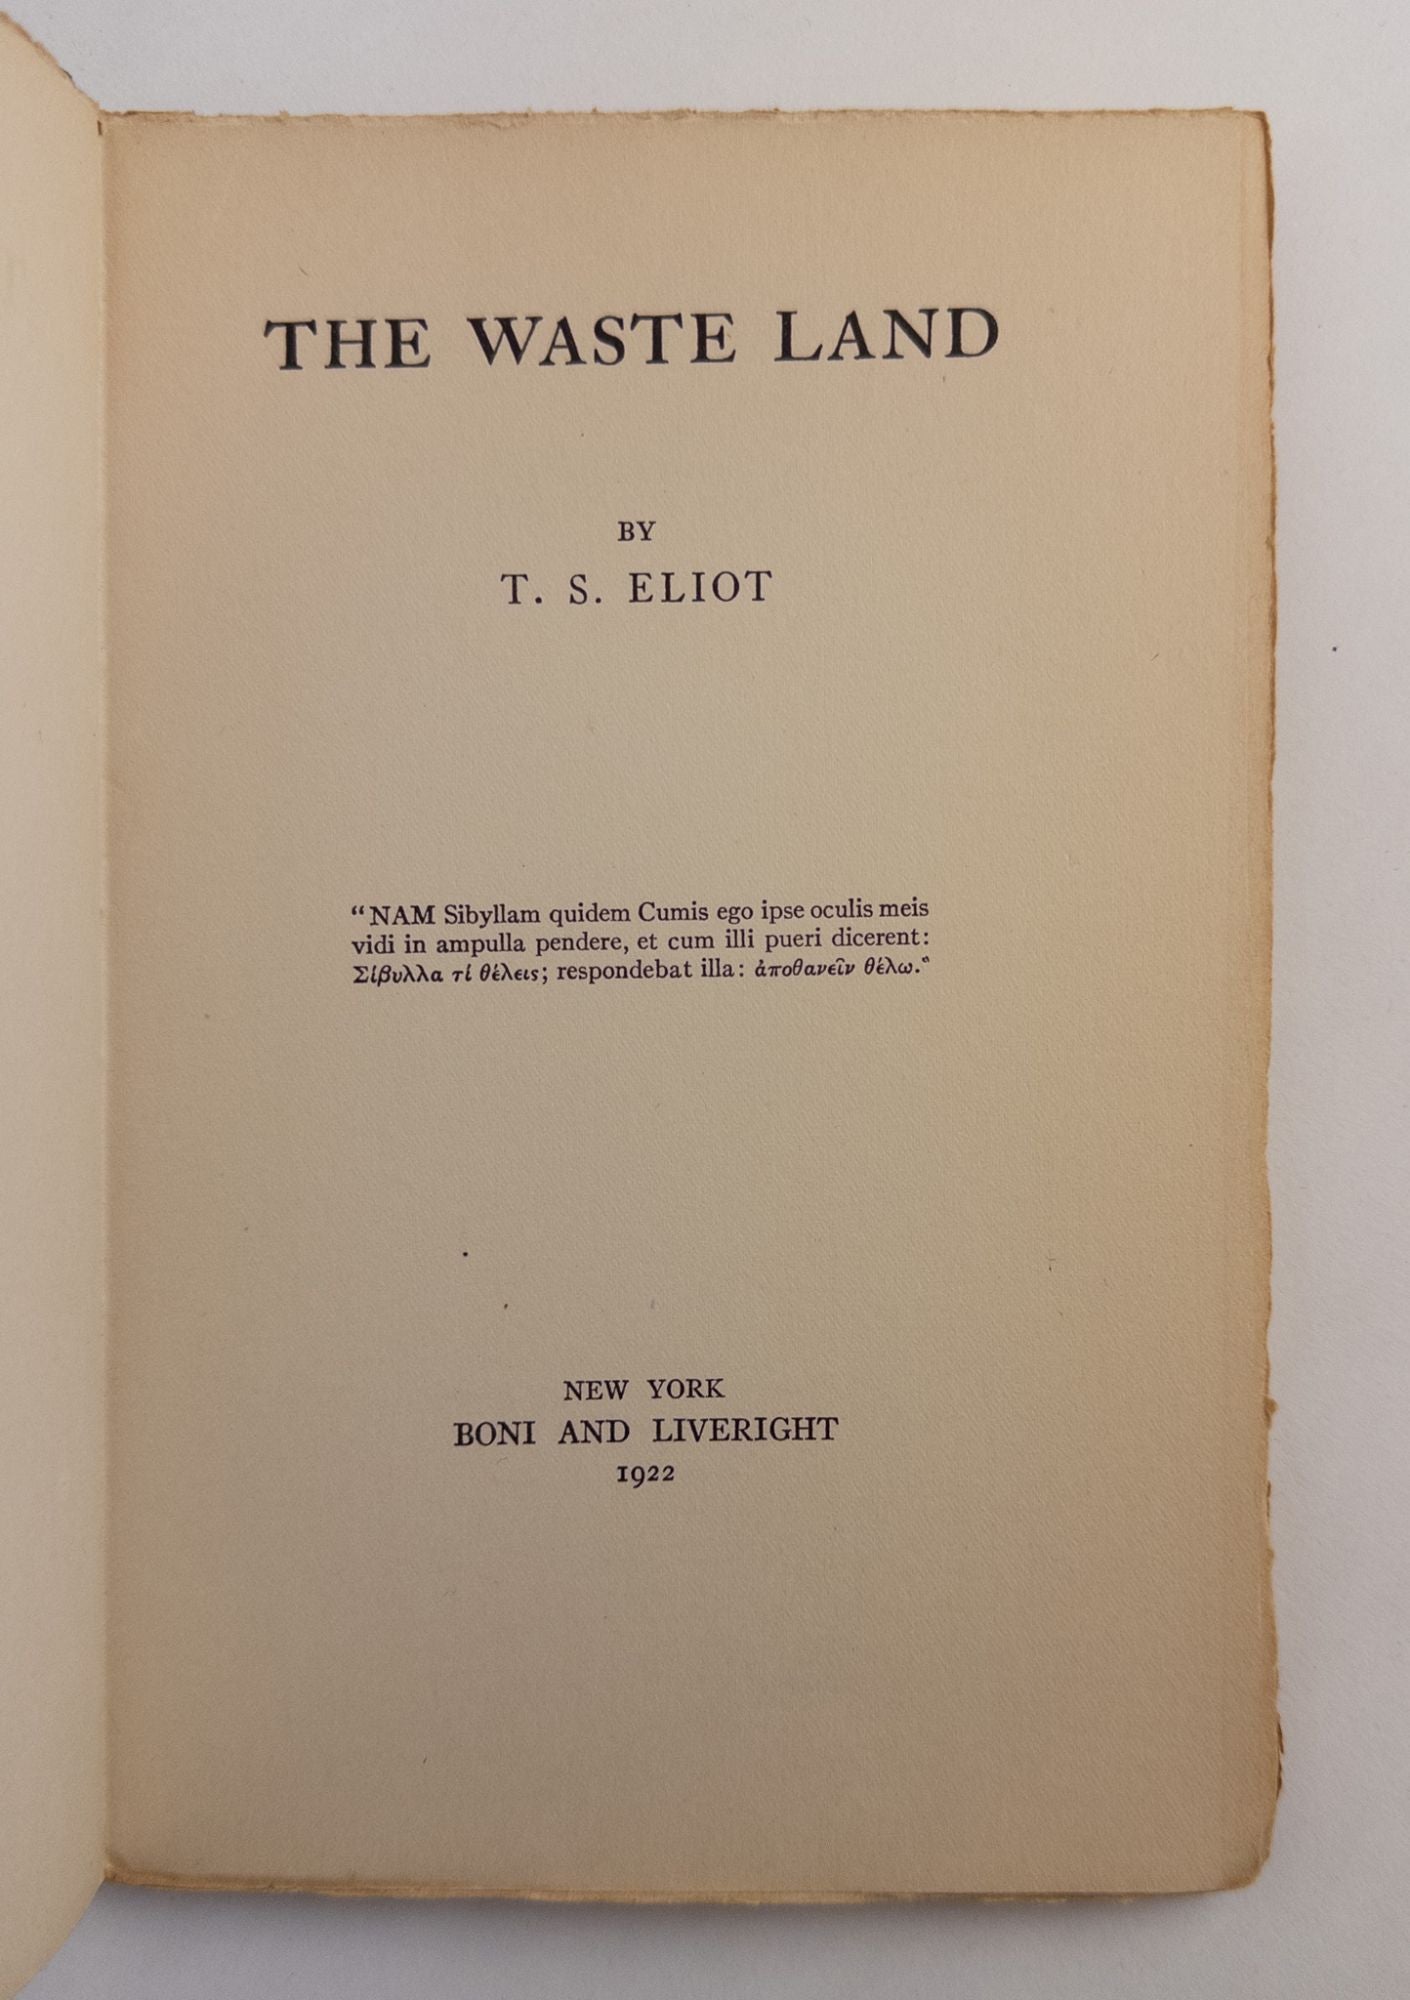 Product Image for THE WASTE LAND